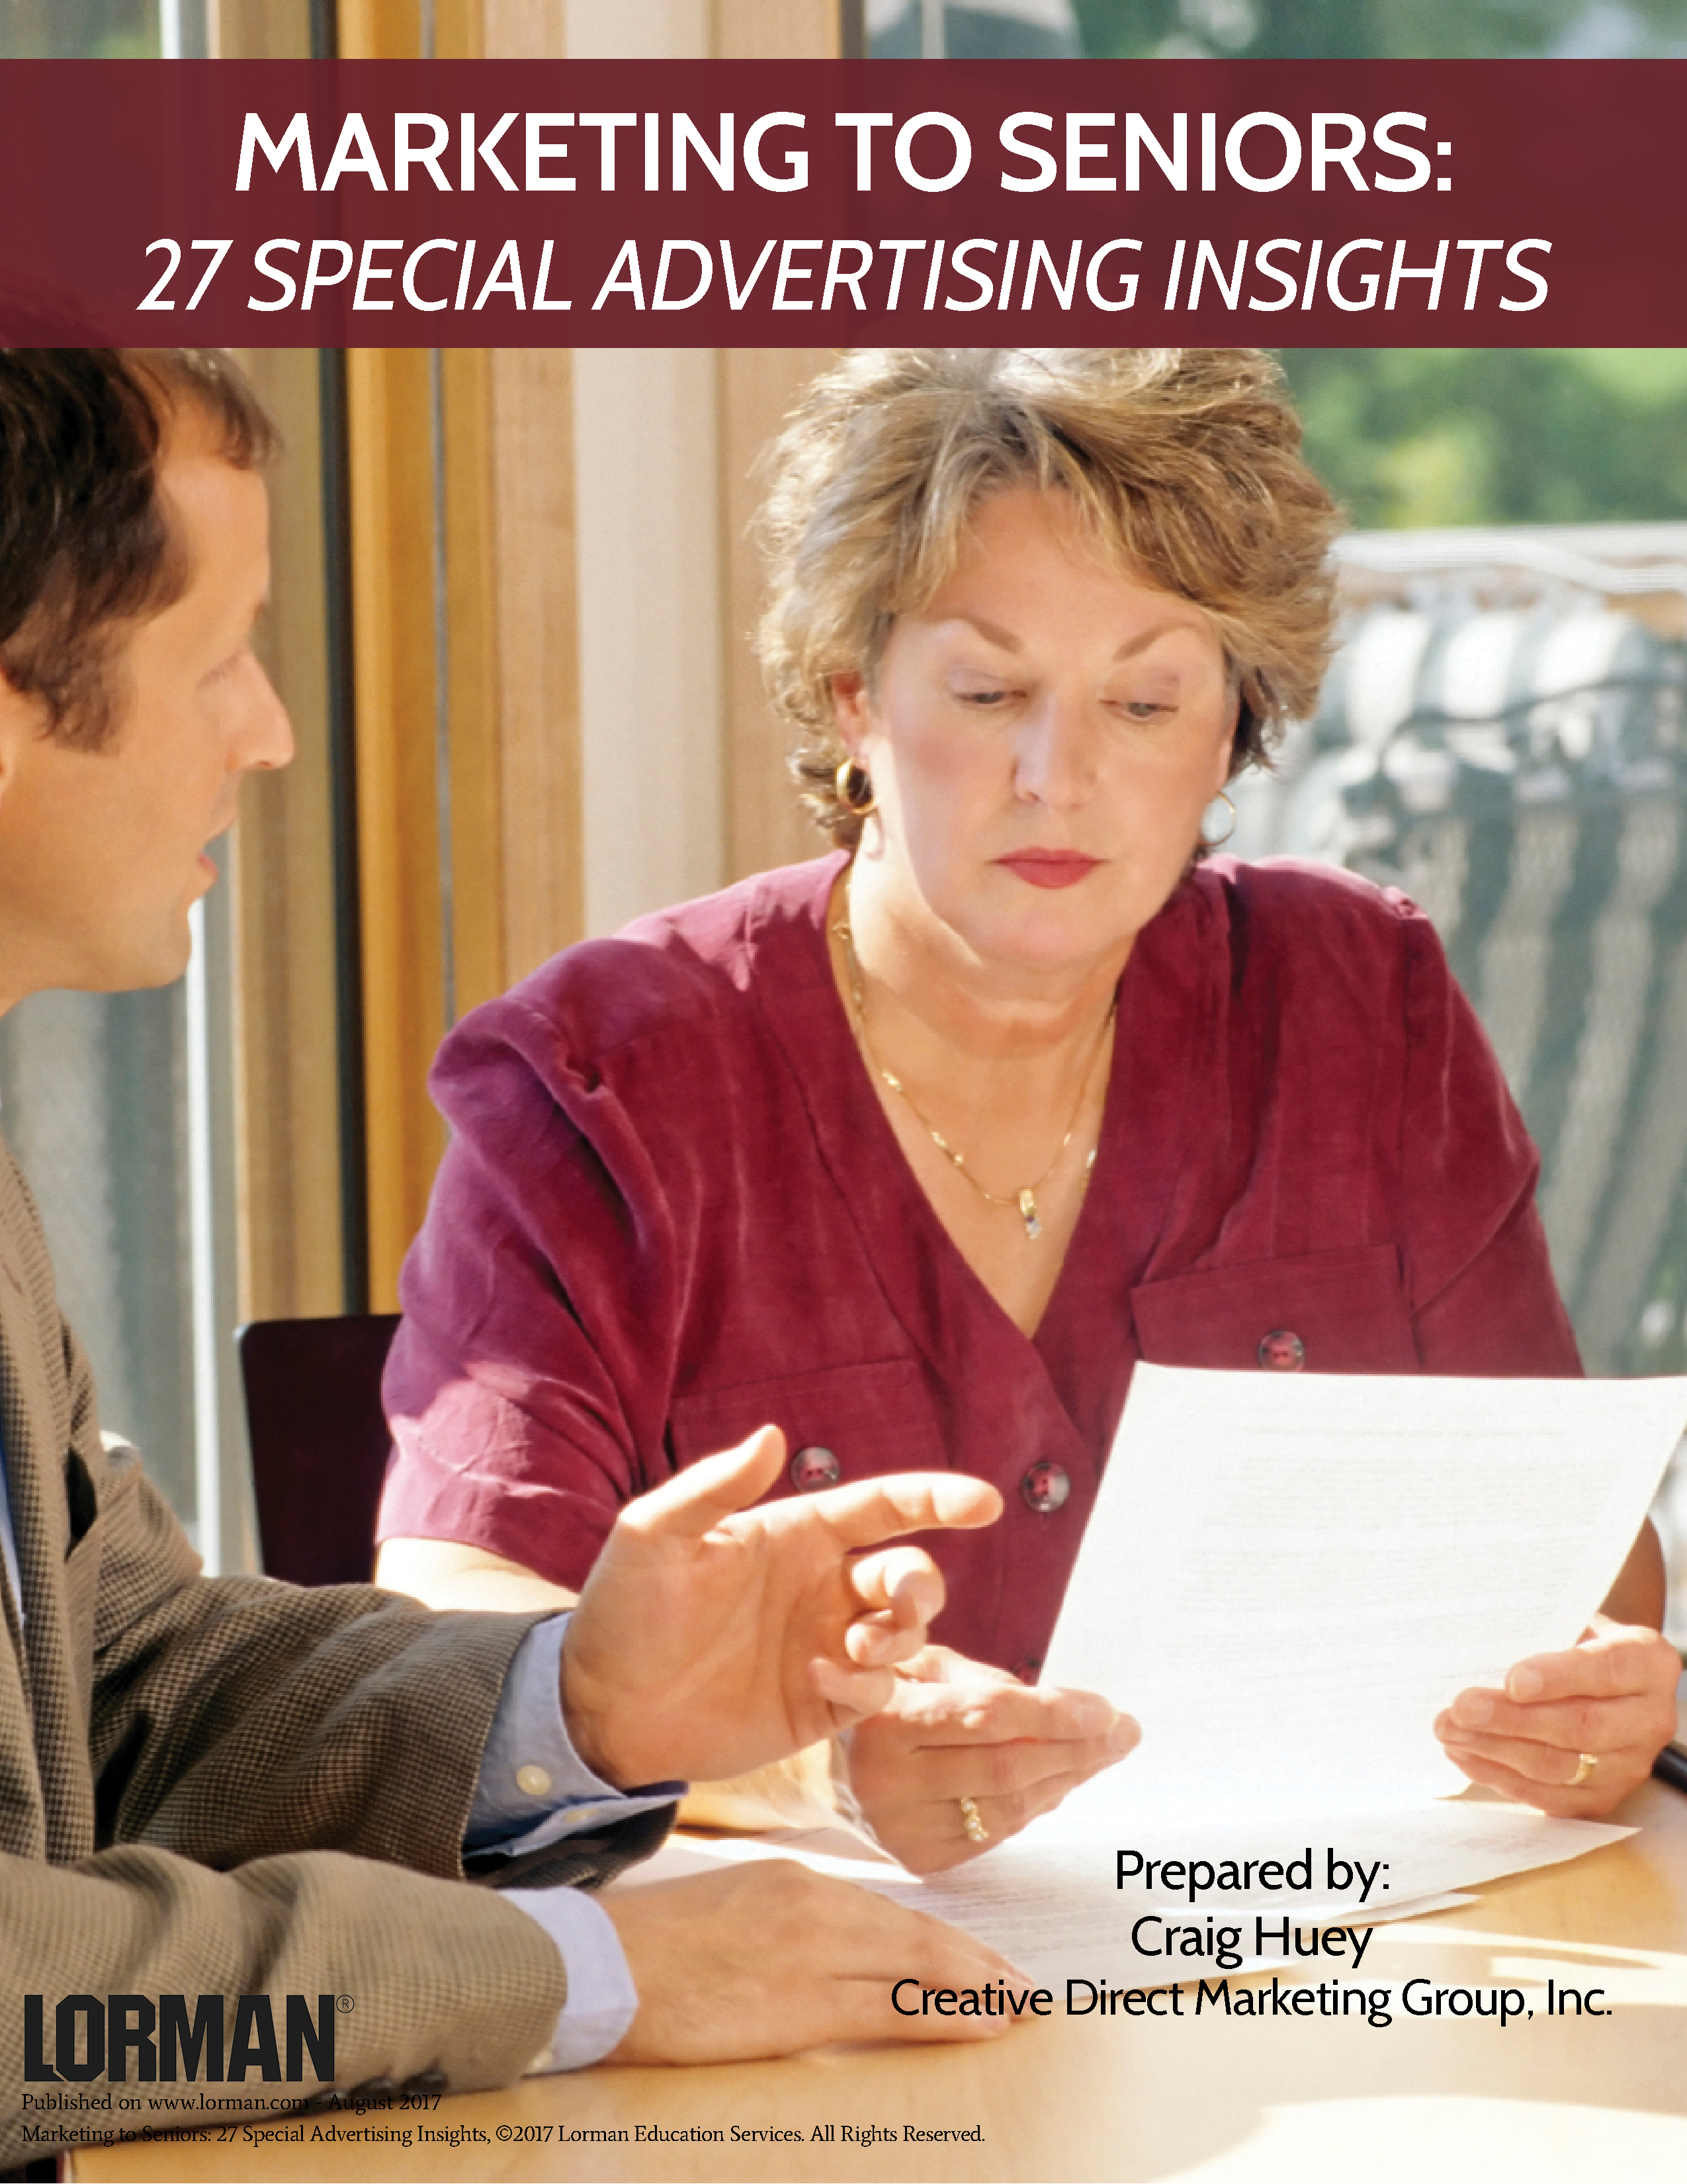 Marketing to Seniors: 27 Special Advertising Insights